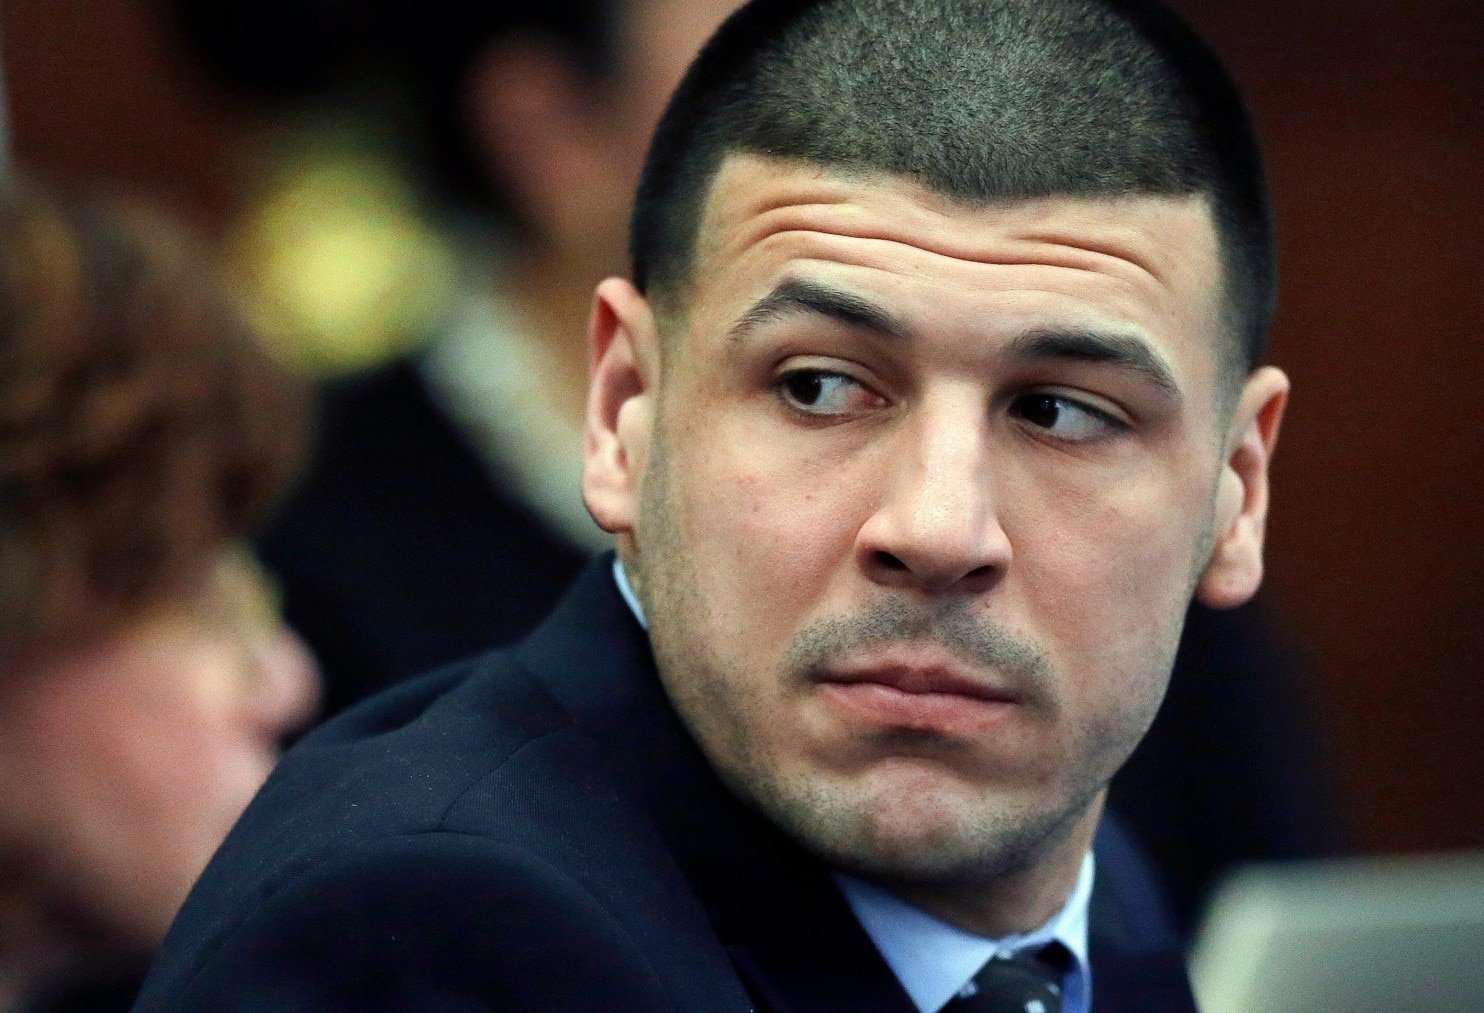 image for Aaron Hernandez suffered from most severe CTE ever found in a person his age